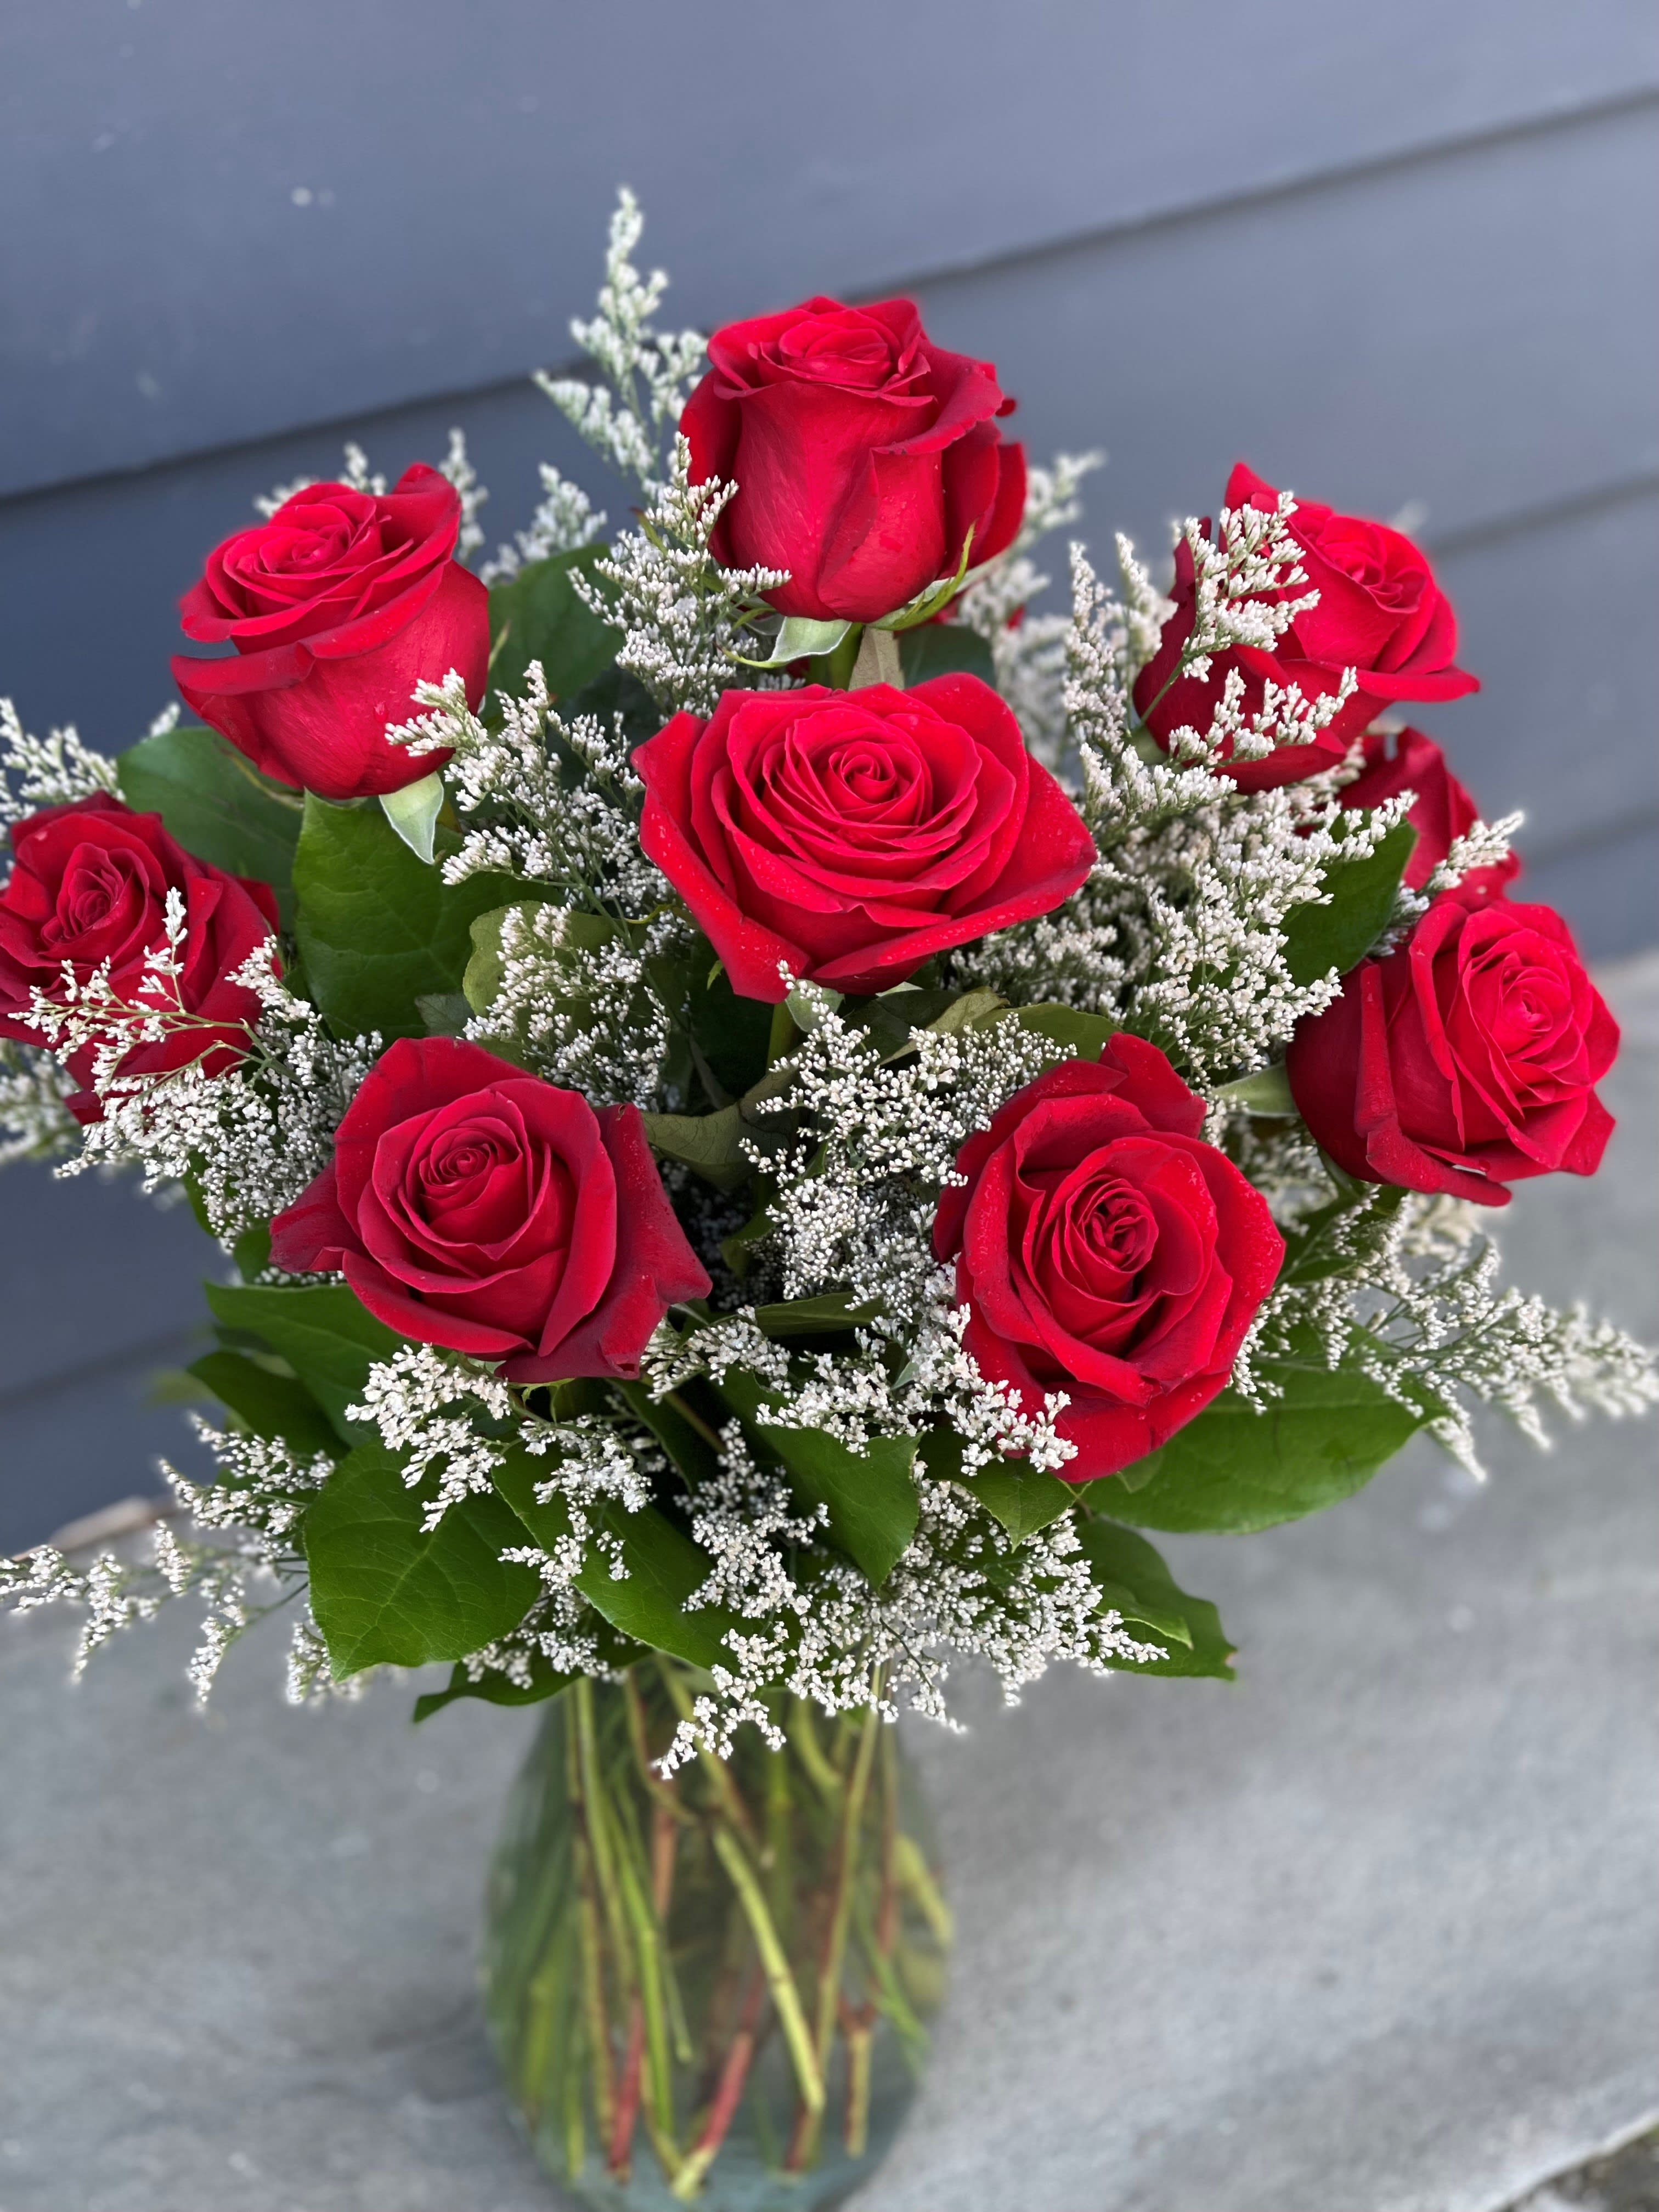 Premium Dozen Red Roses - 12 Premium long stem red roses artfully arranged in a recycled clear glass vase with greens and seasonal filler.